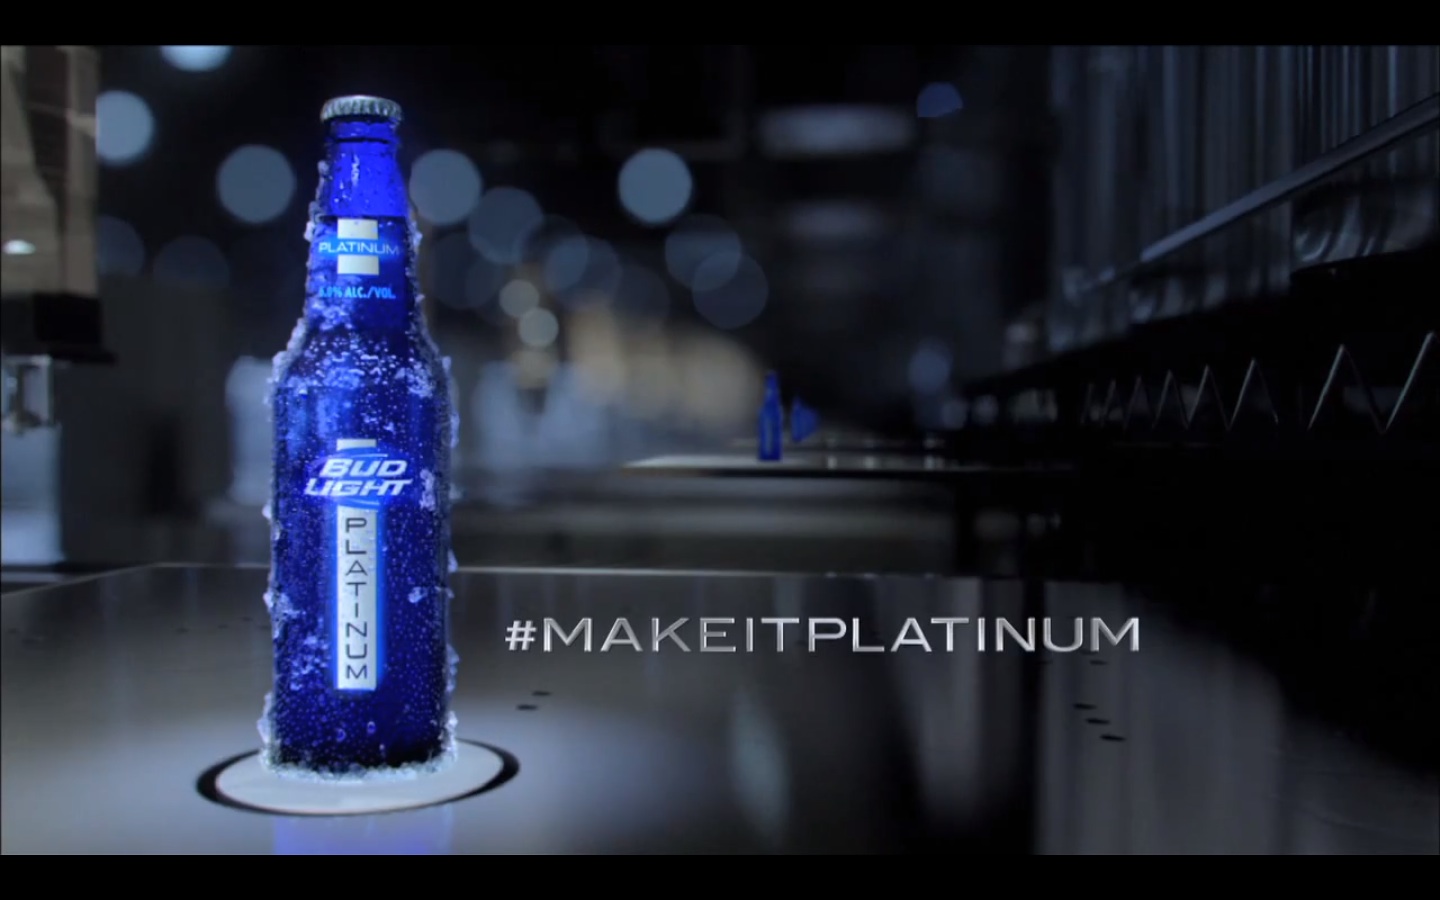 Posts Bud Light Platinum Does Budweiser Water Down Their Beer